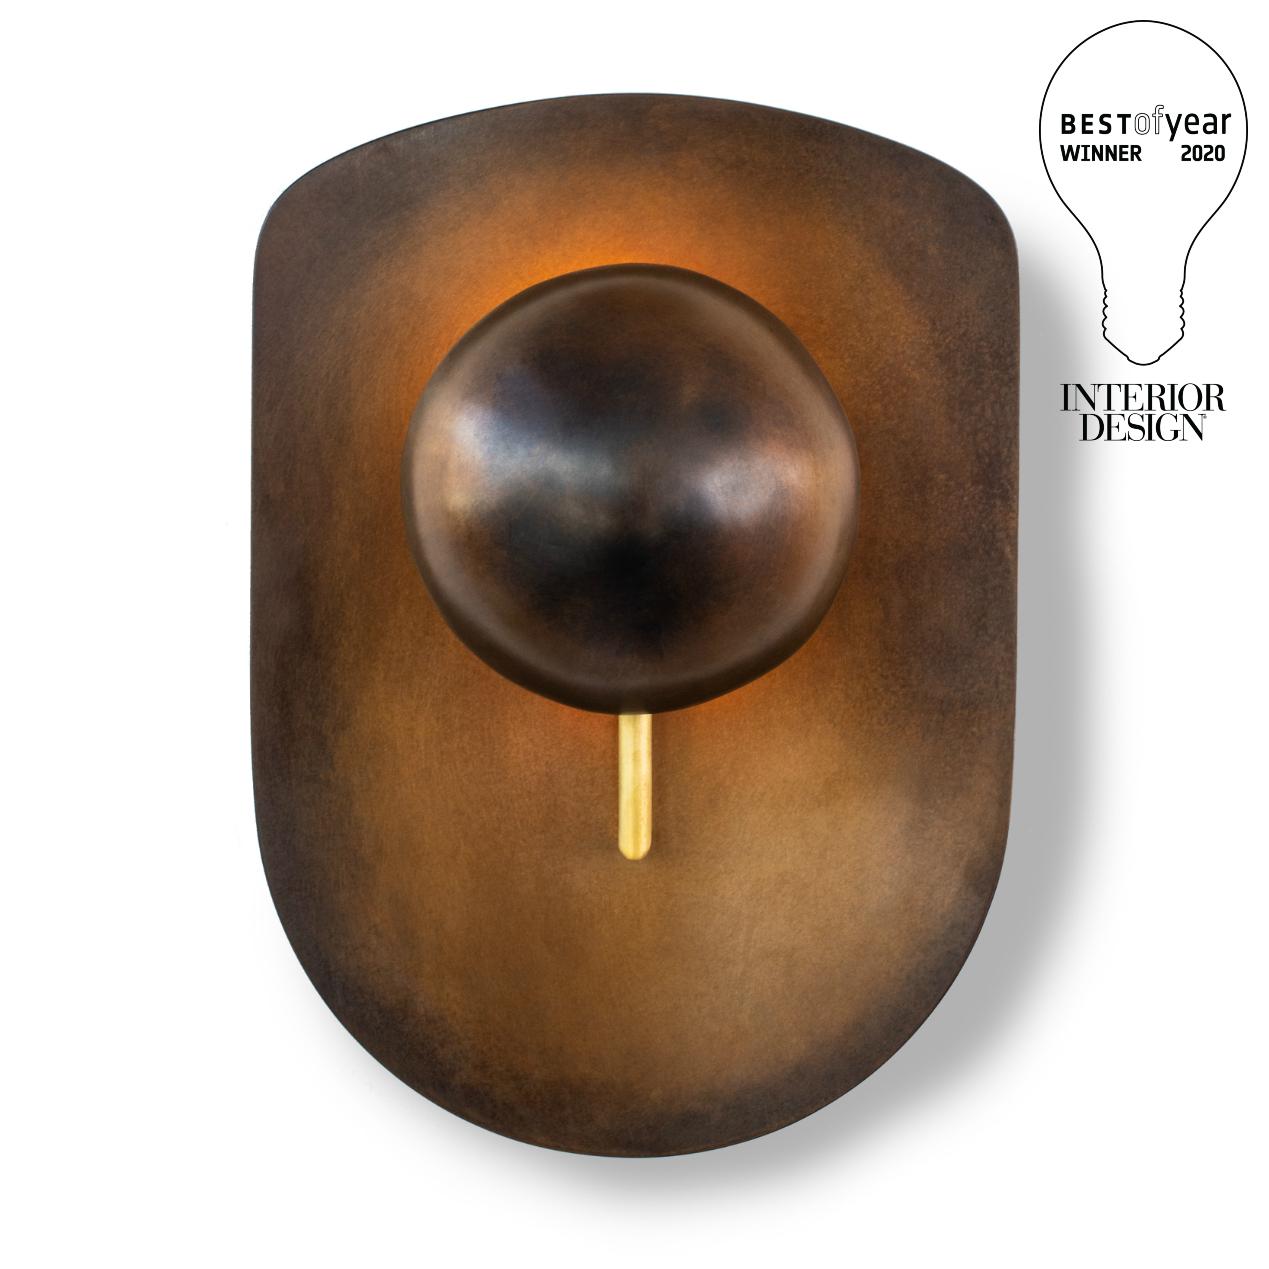 Winner of Interior Design Magazine's 2020 BEST OF YEAR award - the Gil Melott Bespoke Luz SC Form 9 bronze sconce serves not just as a light fixture, but as an anthropomorphic piece of sculpture adorning the wall. Its delicate form belies its